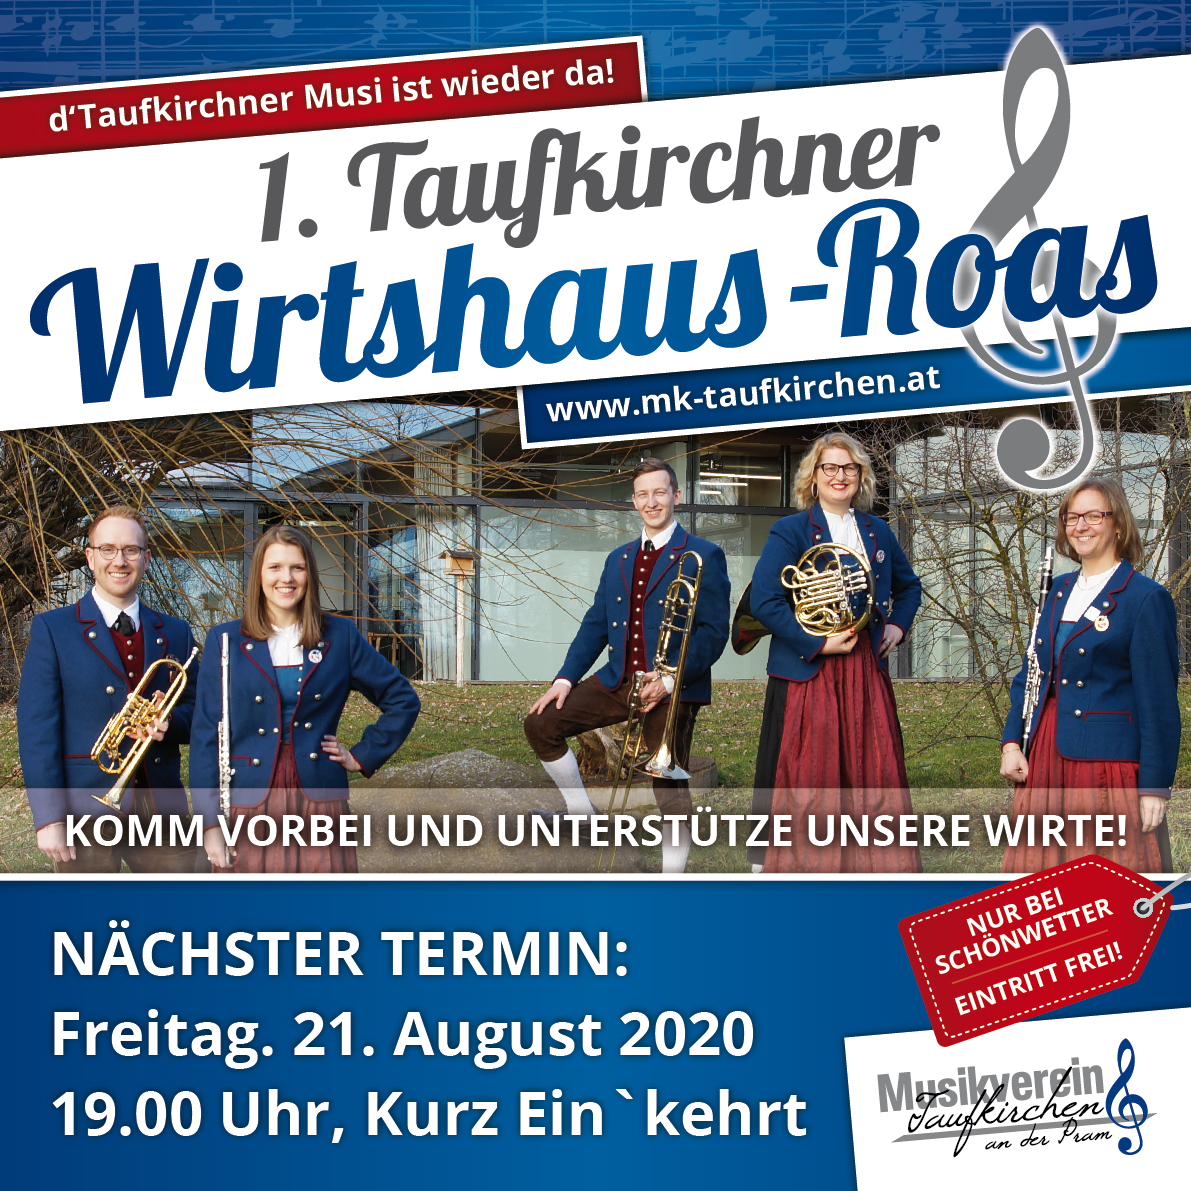 You are currently viewing 1. Taufkirchner Wirtshausroas